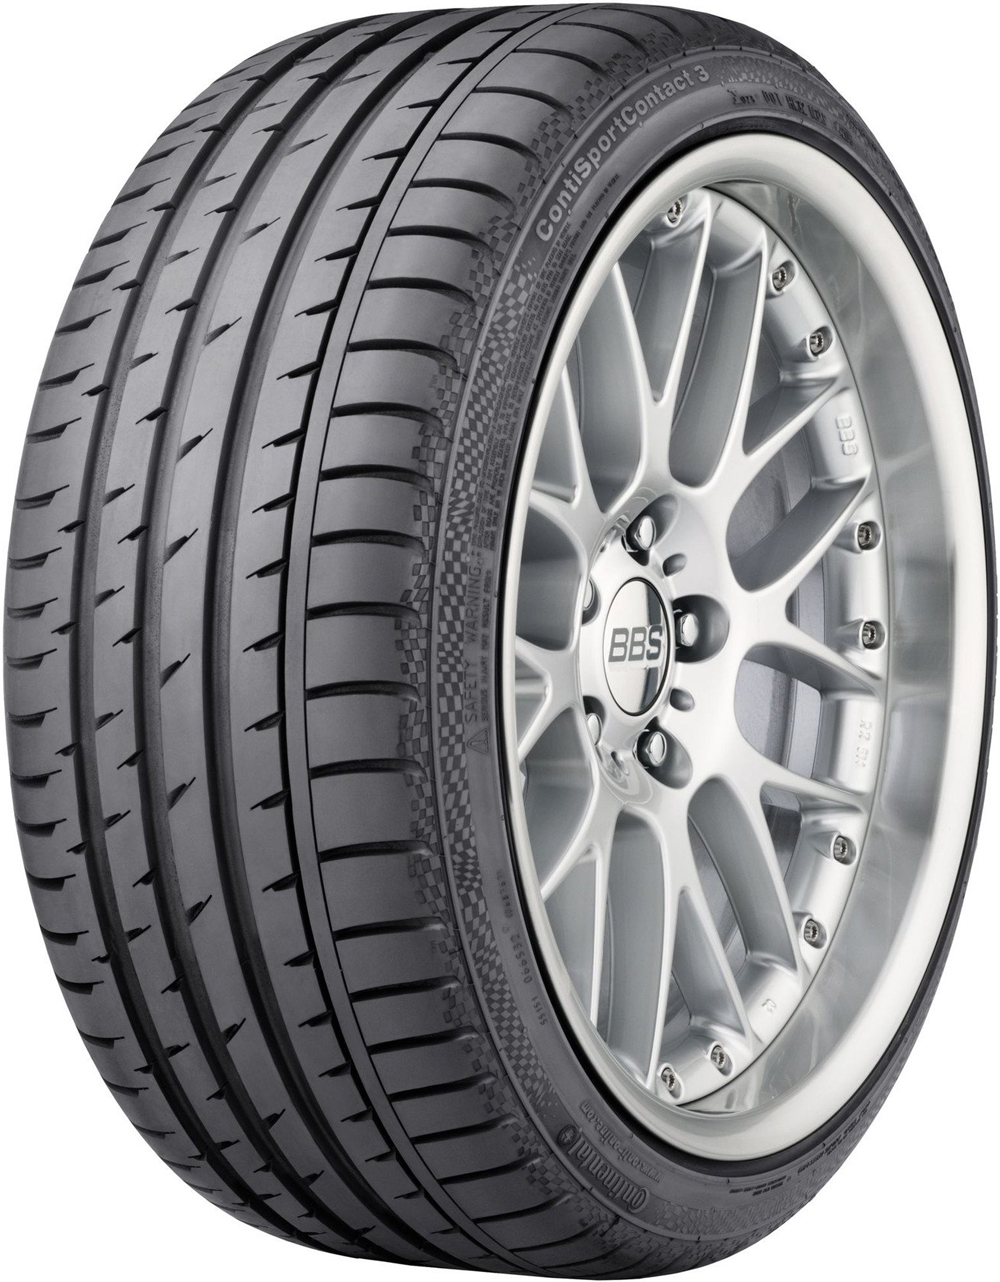 Anvelope auto CONTINENTAL SC-3 AO XL AUDI FP 265/40 R20 104Y